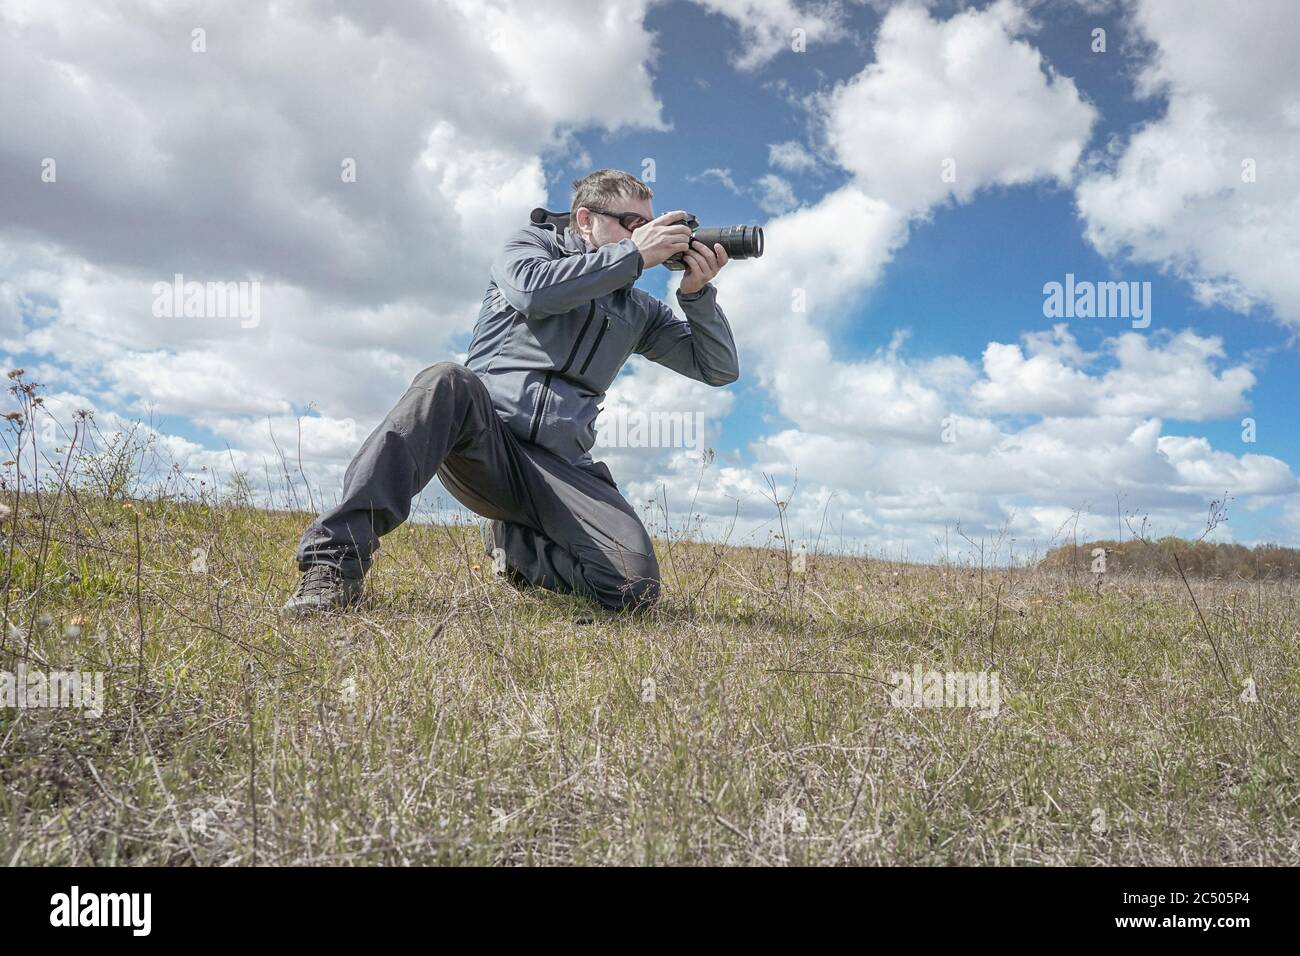 Wild life Nature photographer take a picture in field Stock Photo